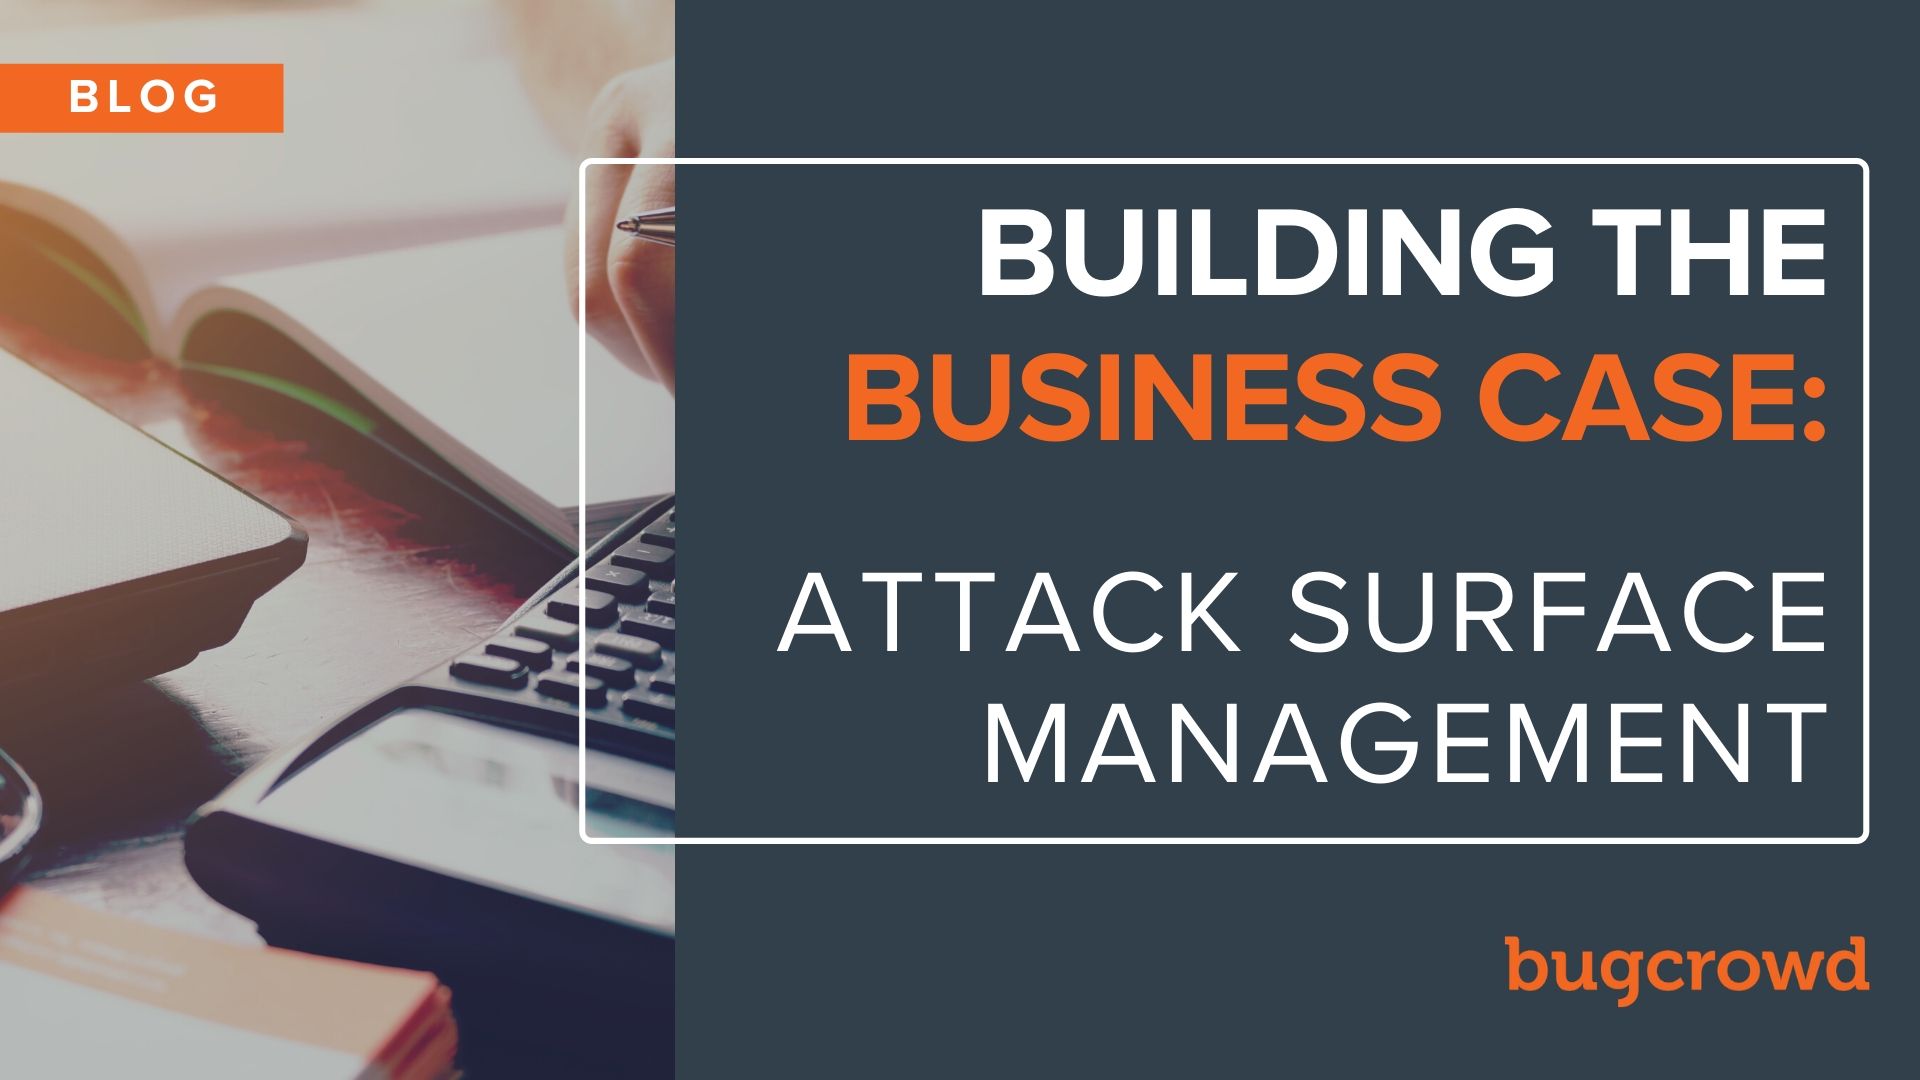 Building the Business Case for Attack Surface Management